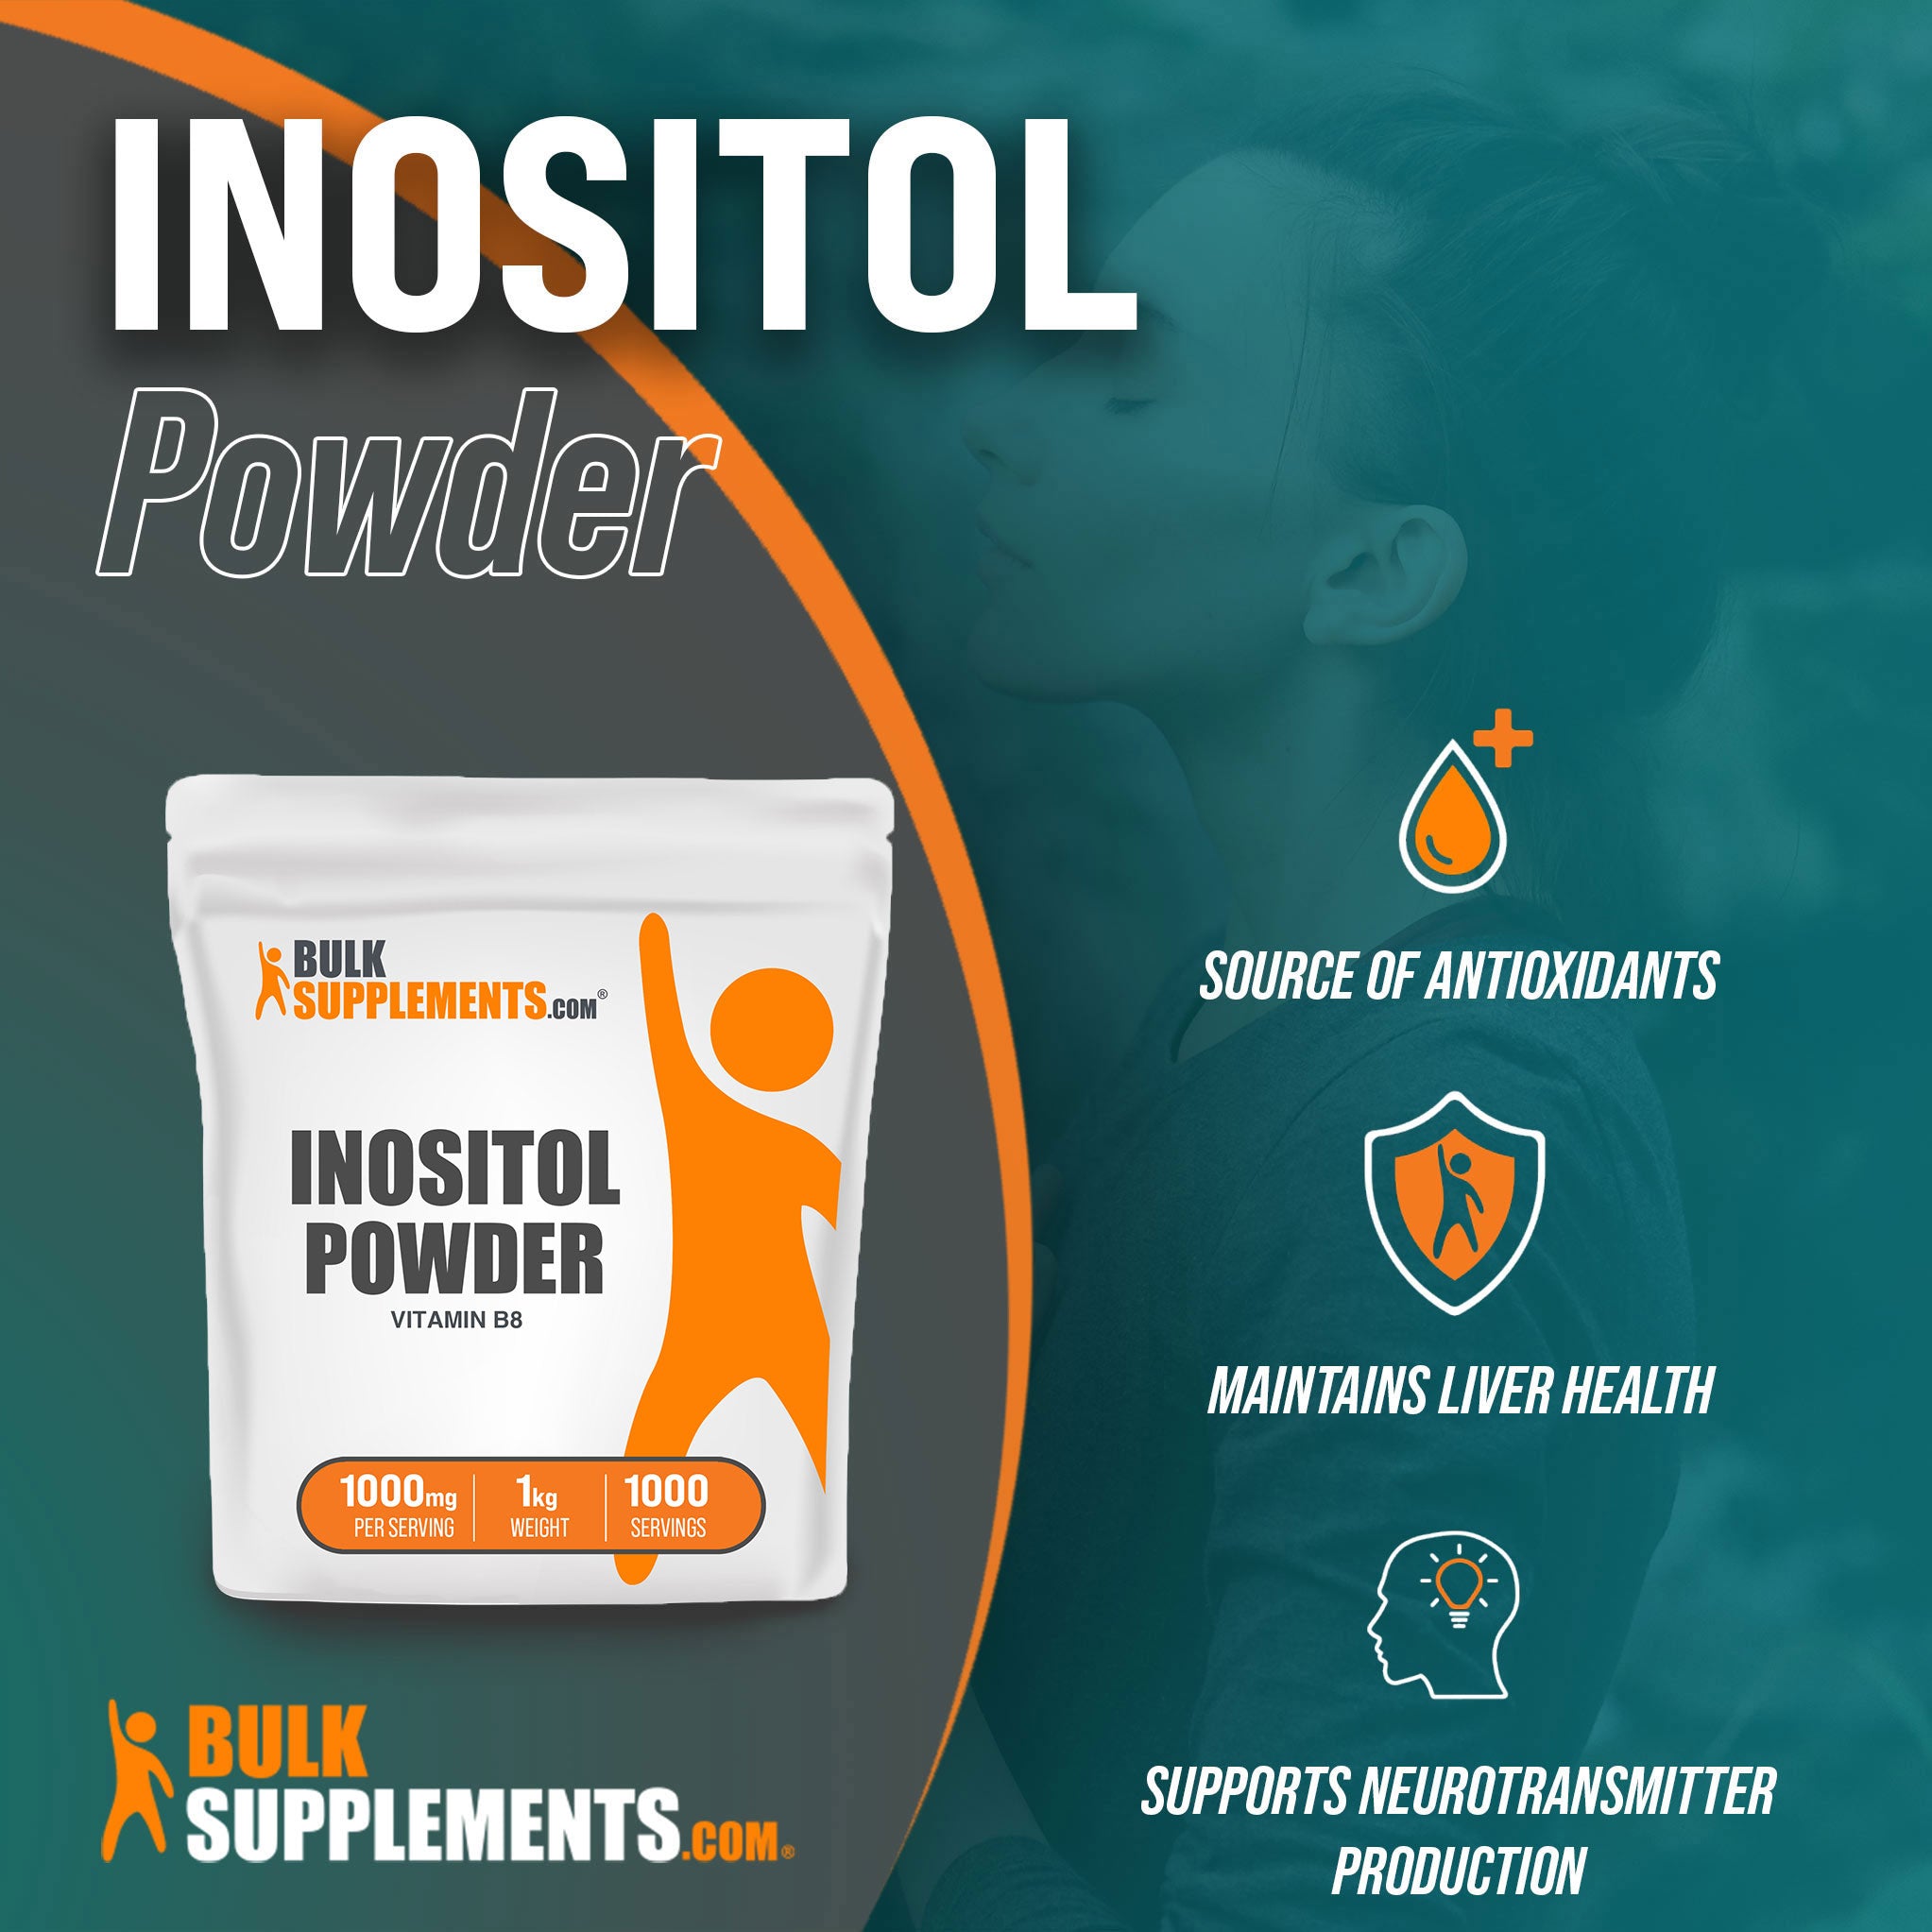 Benefits of Inositol Powder; source of antioxidants, maintains liver health, supports neurotransmitter production